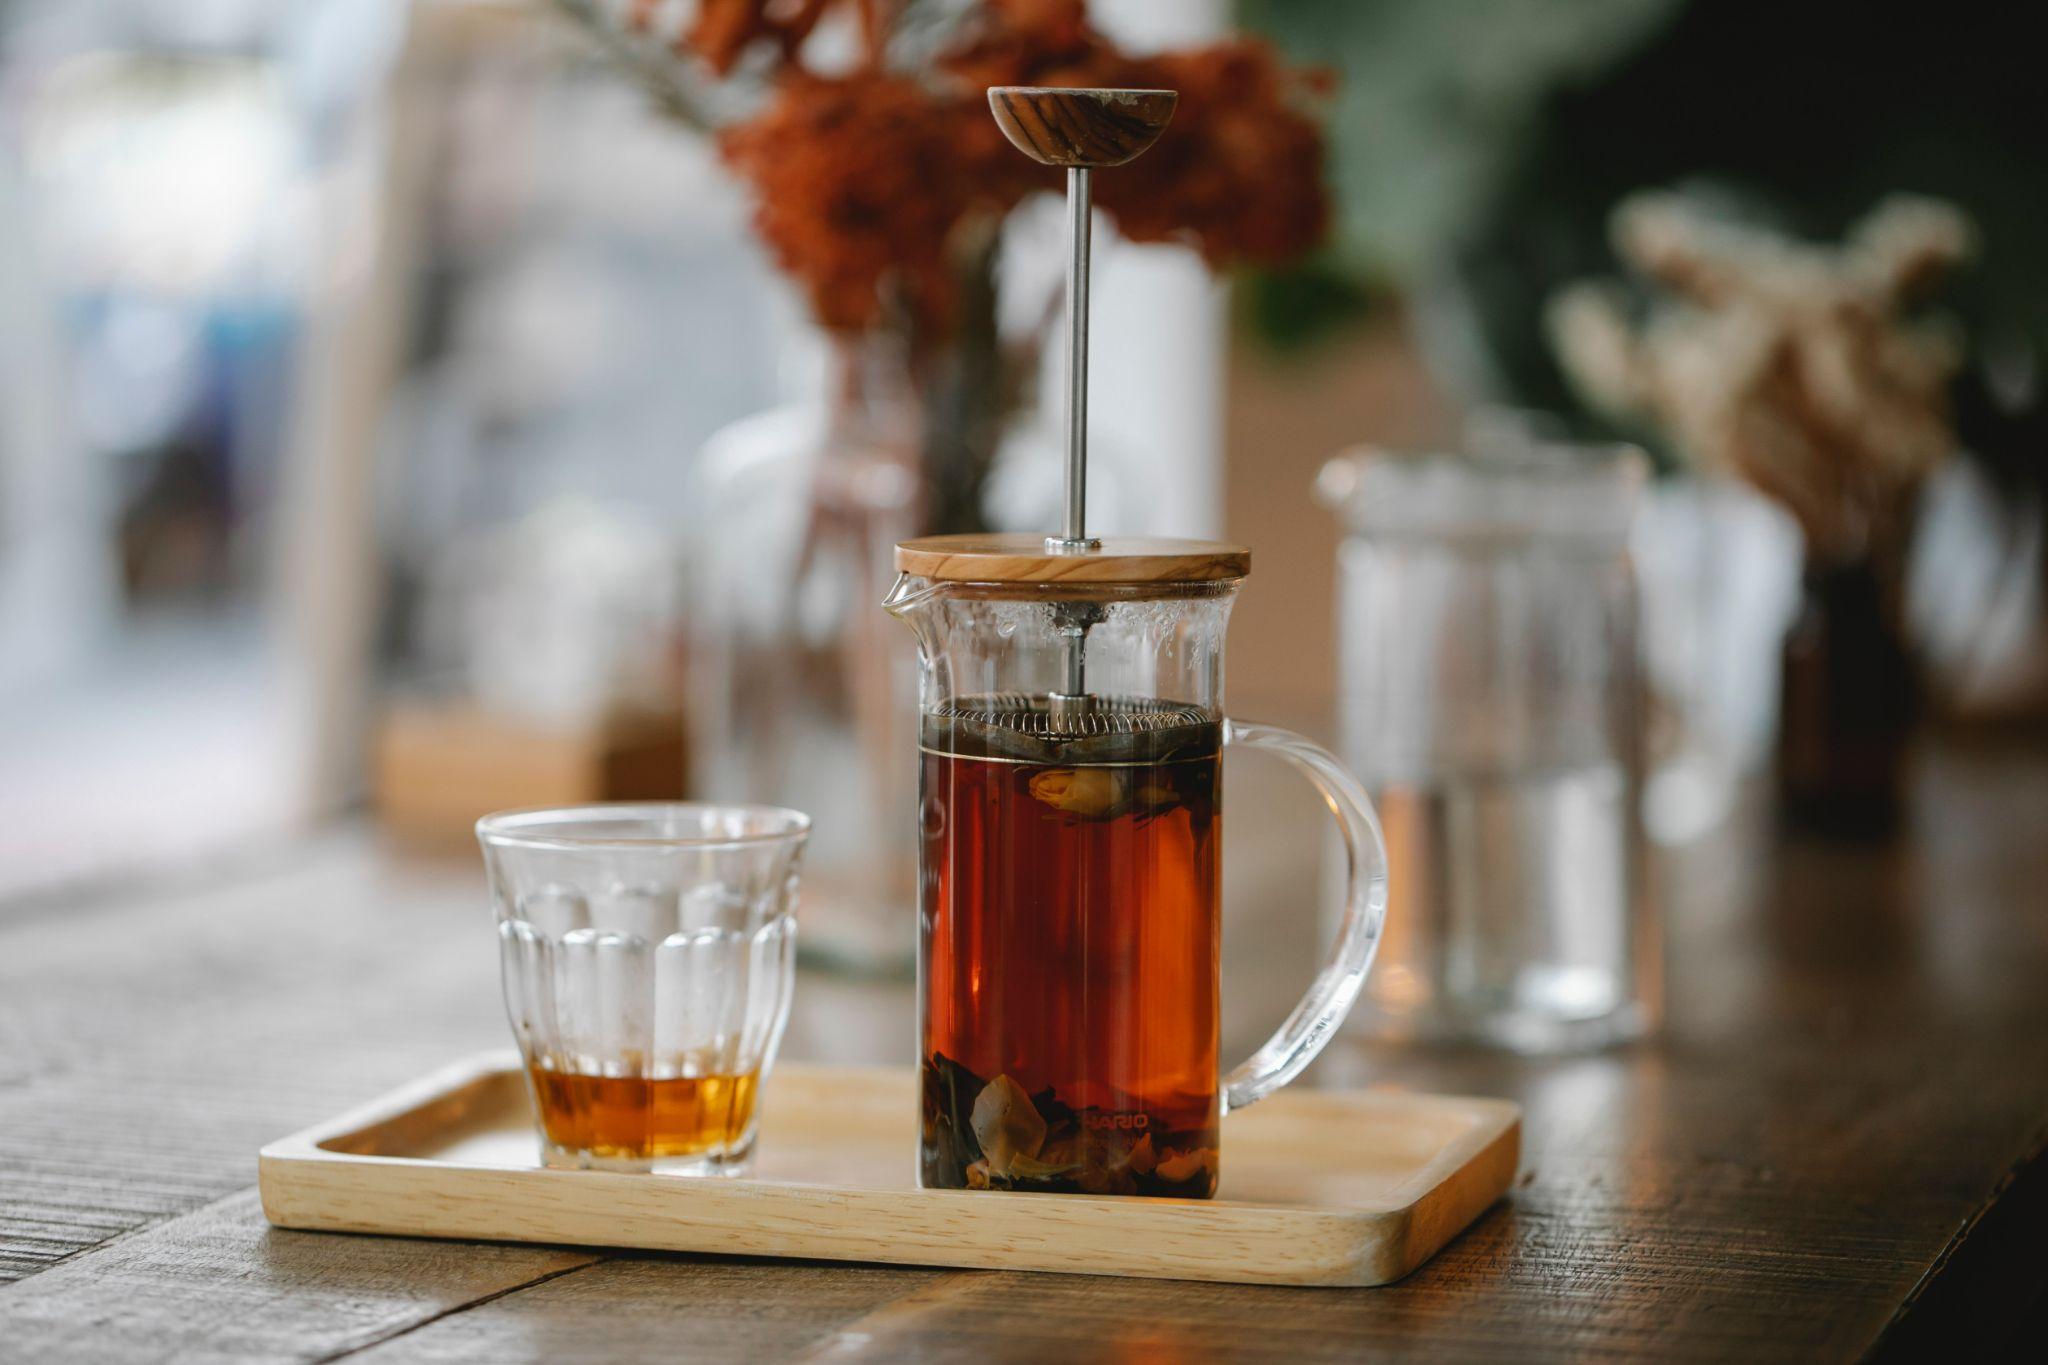 Brewing Tea with a French Press 101: Here’s How You Do It